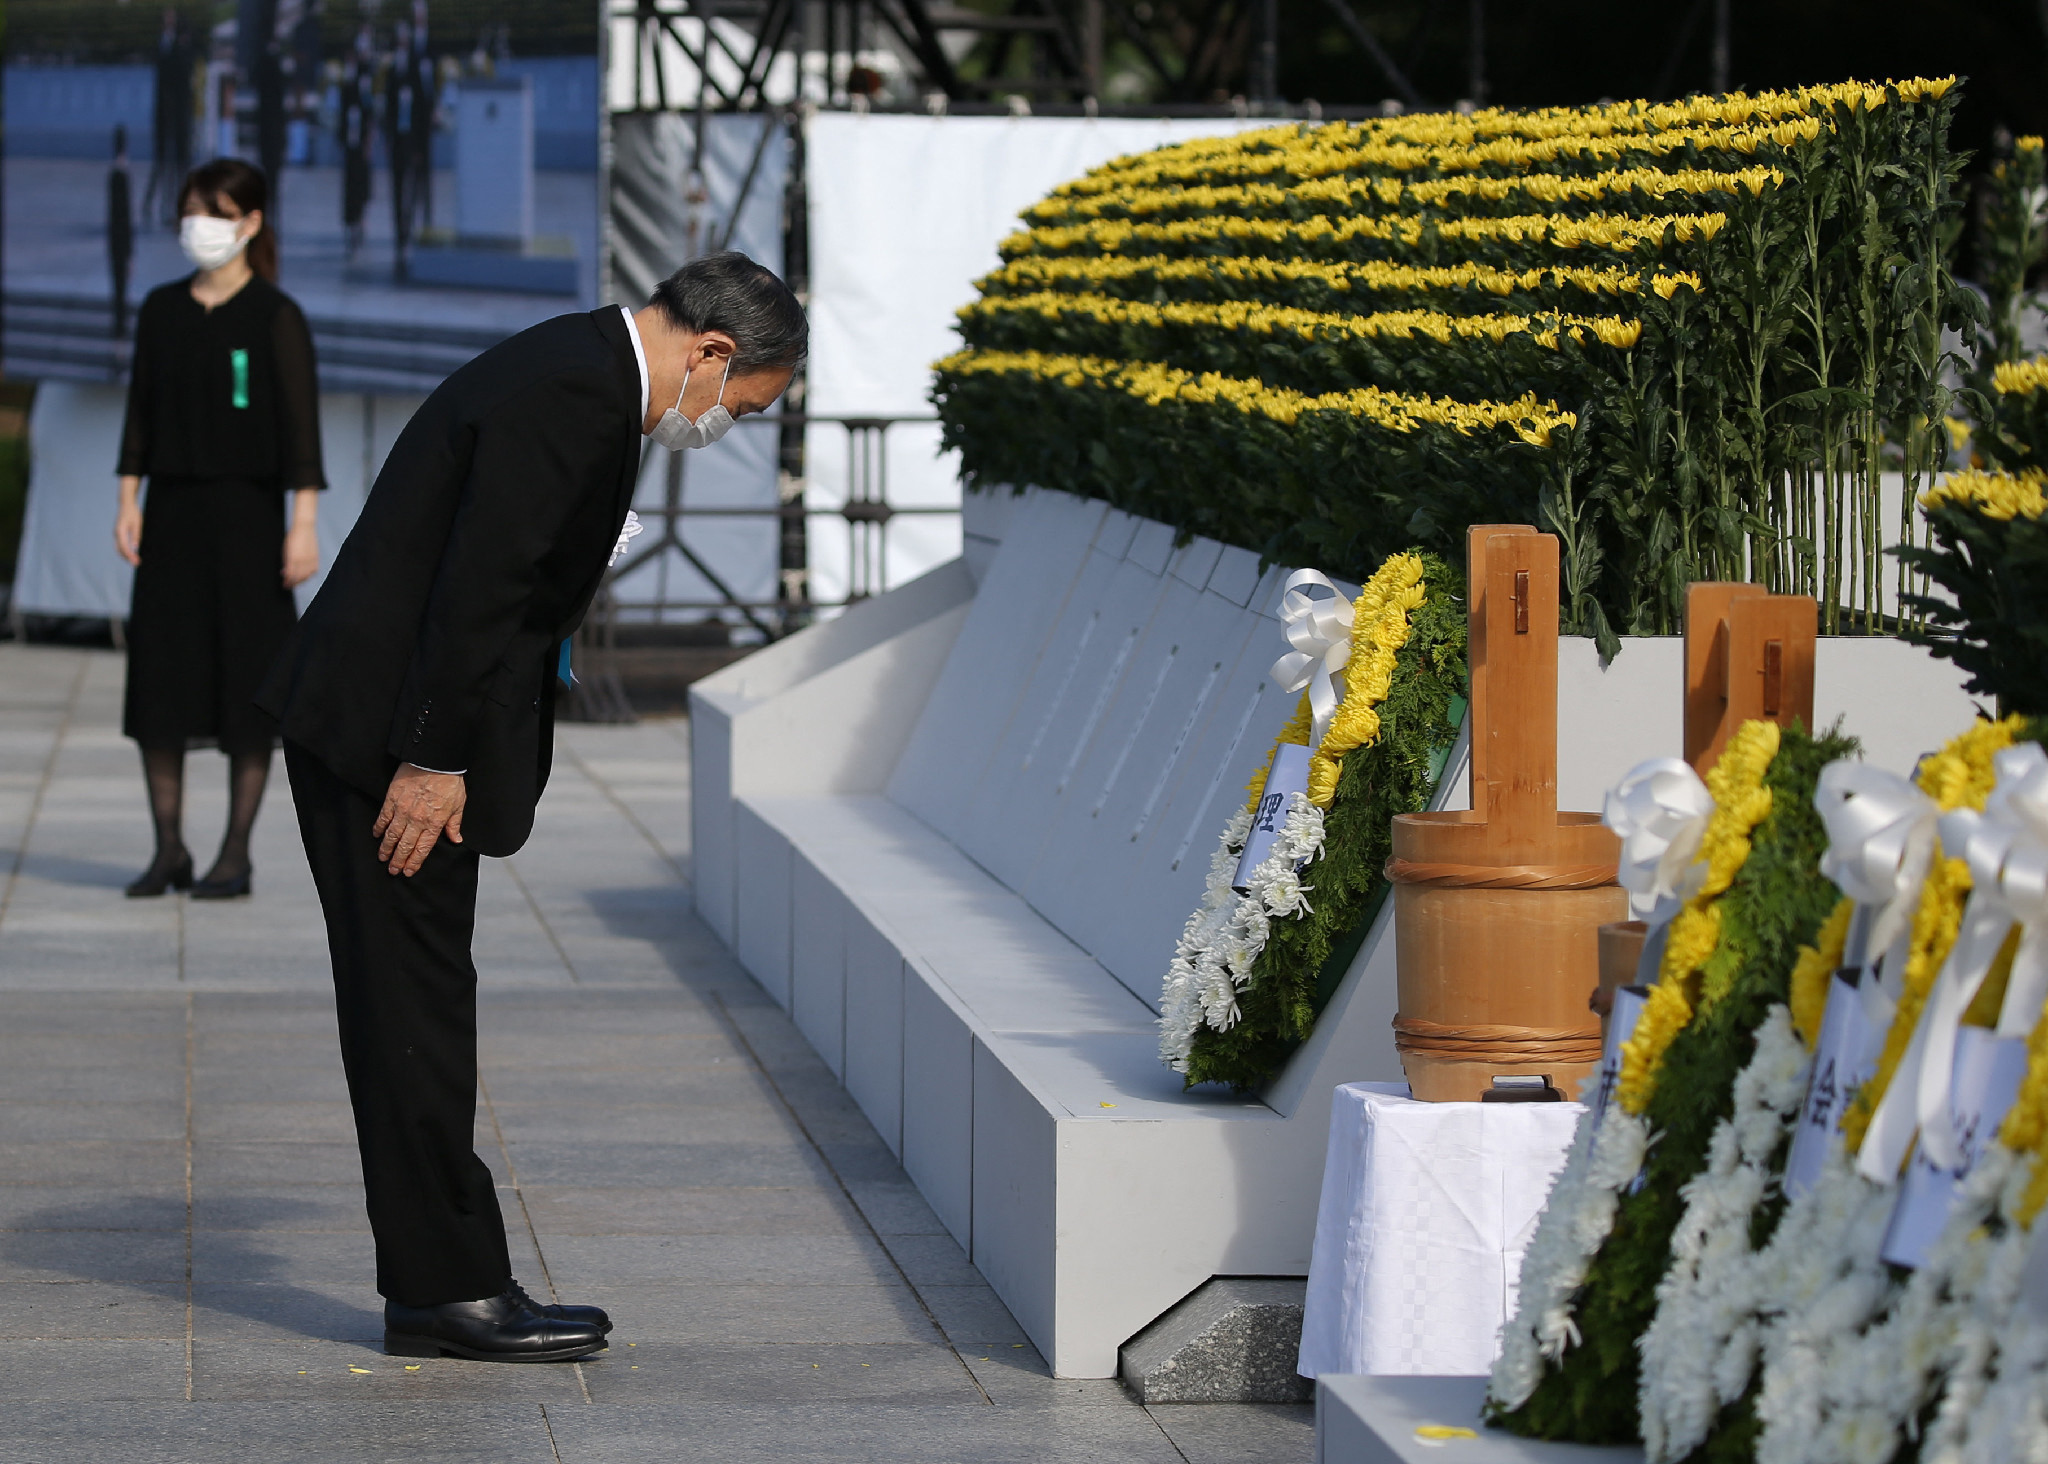 Japan's Prime Minister Yoshihide Suga paid tribute to victims of the Hiroshima atomic bomb on the 76th anniversary of the tragic event ©Getty Images